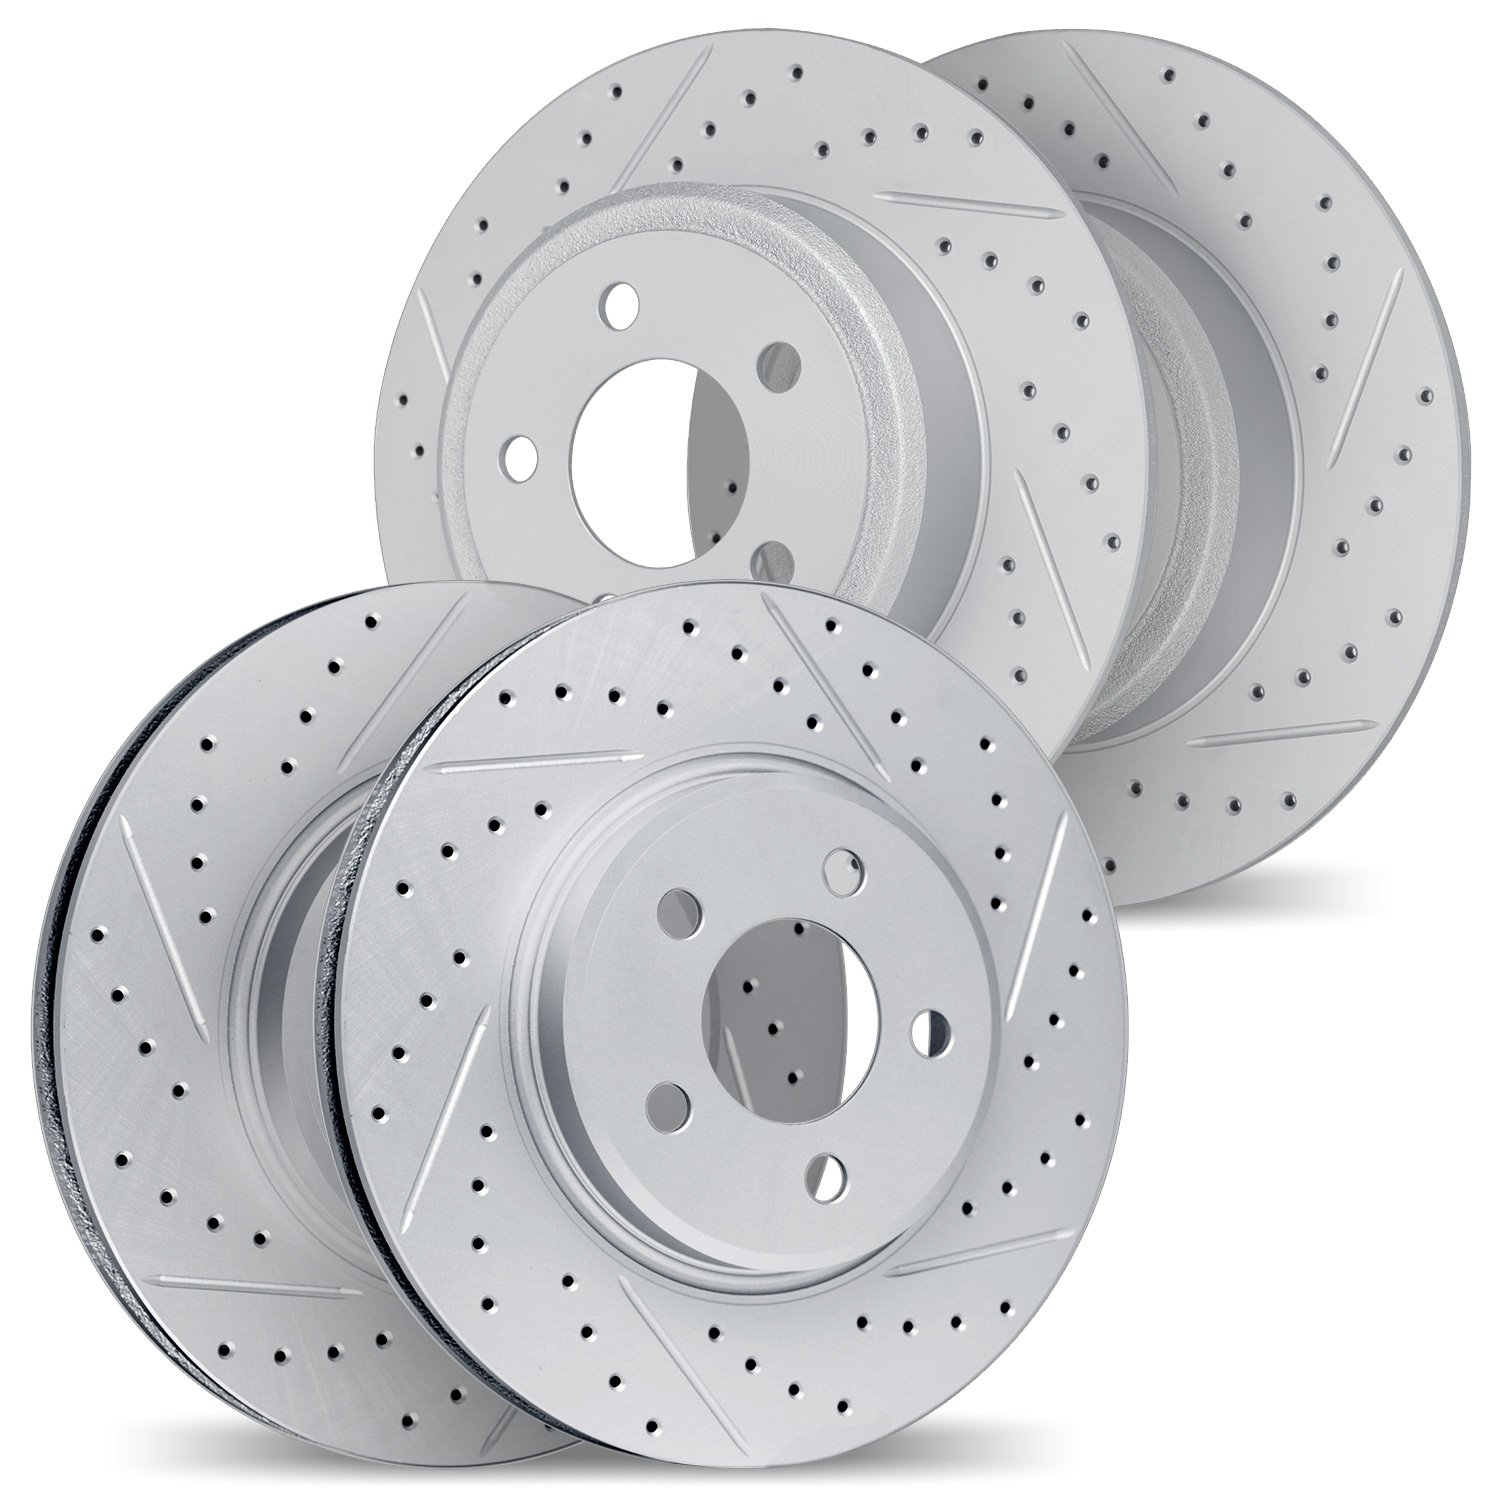 2004-72017 Geoperformance Drilled/Slotted Brake Rotors, 2004-2011 Mitsubishi, Position: Front and Rear